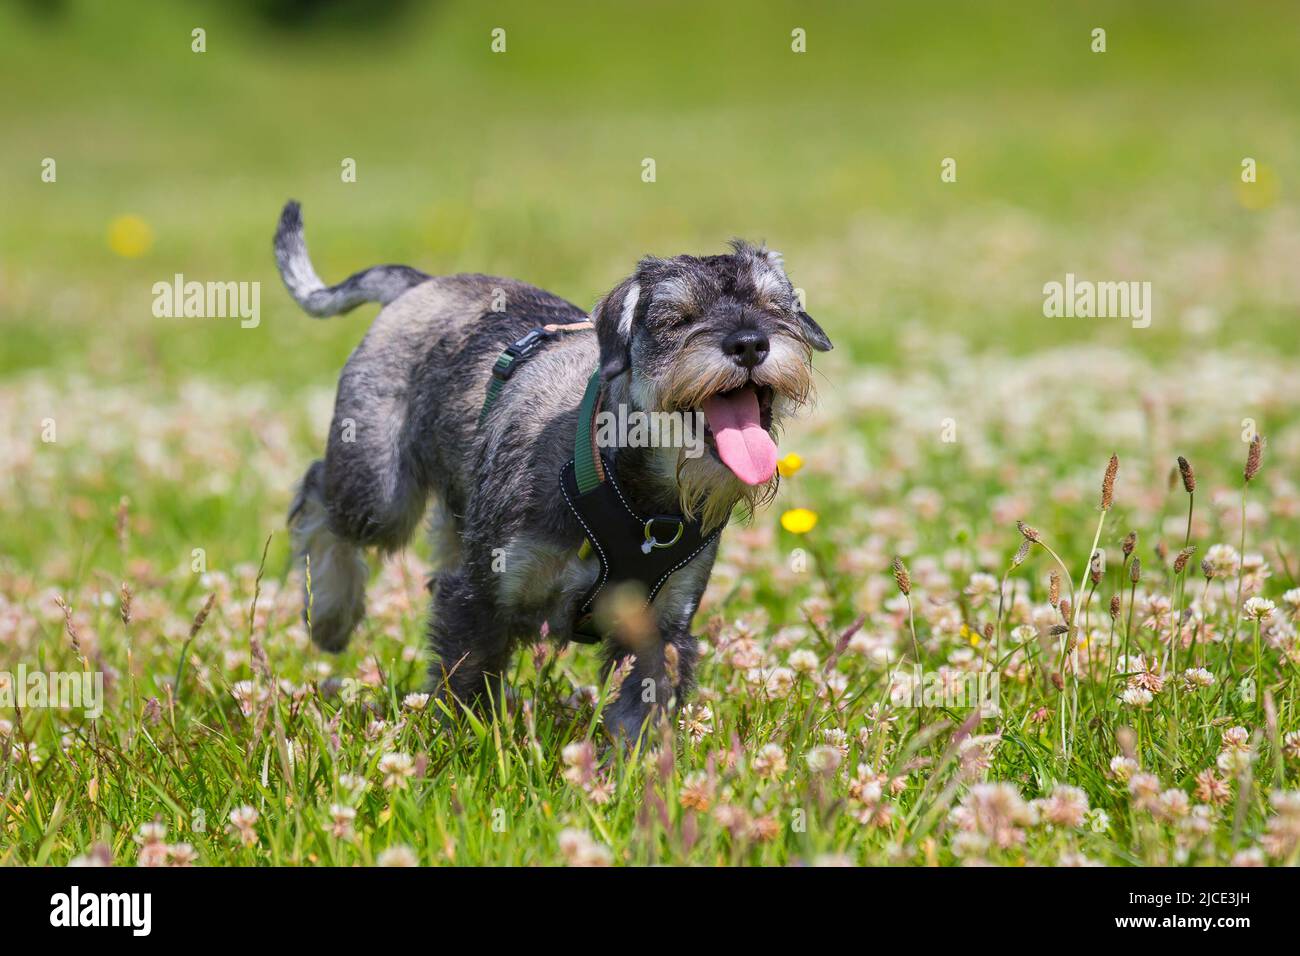 Kidderminster, UK. 12th June. 2022. UK weather: with lovely, warm temperatures and sunny conditions, today is a perfect day to play in the park. This young Schnauzer dog is having so much fun as he races through the clover flowers, tongue hanging out, in a country park. Credit: Lee Hudson/Alamy Live News Stock Photo